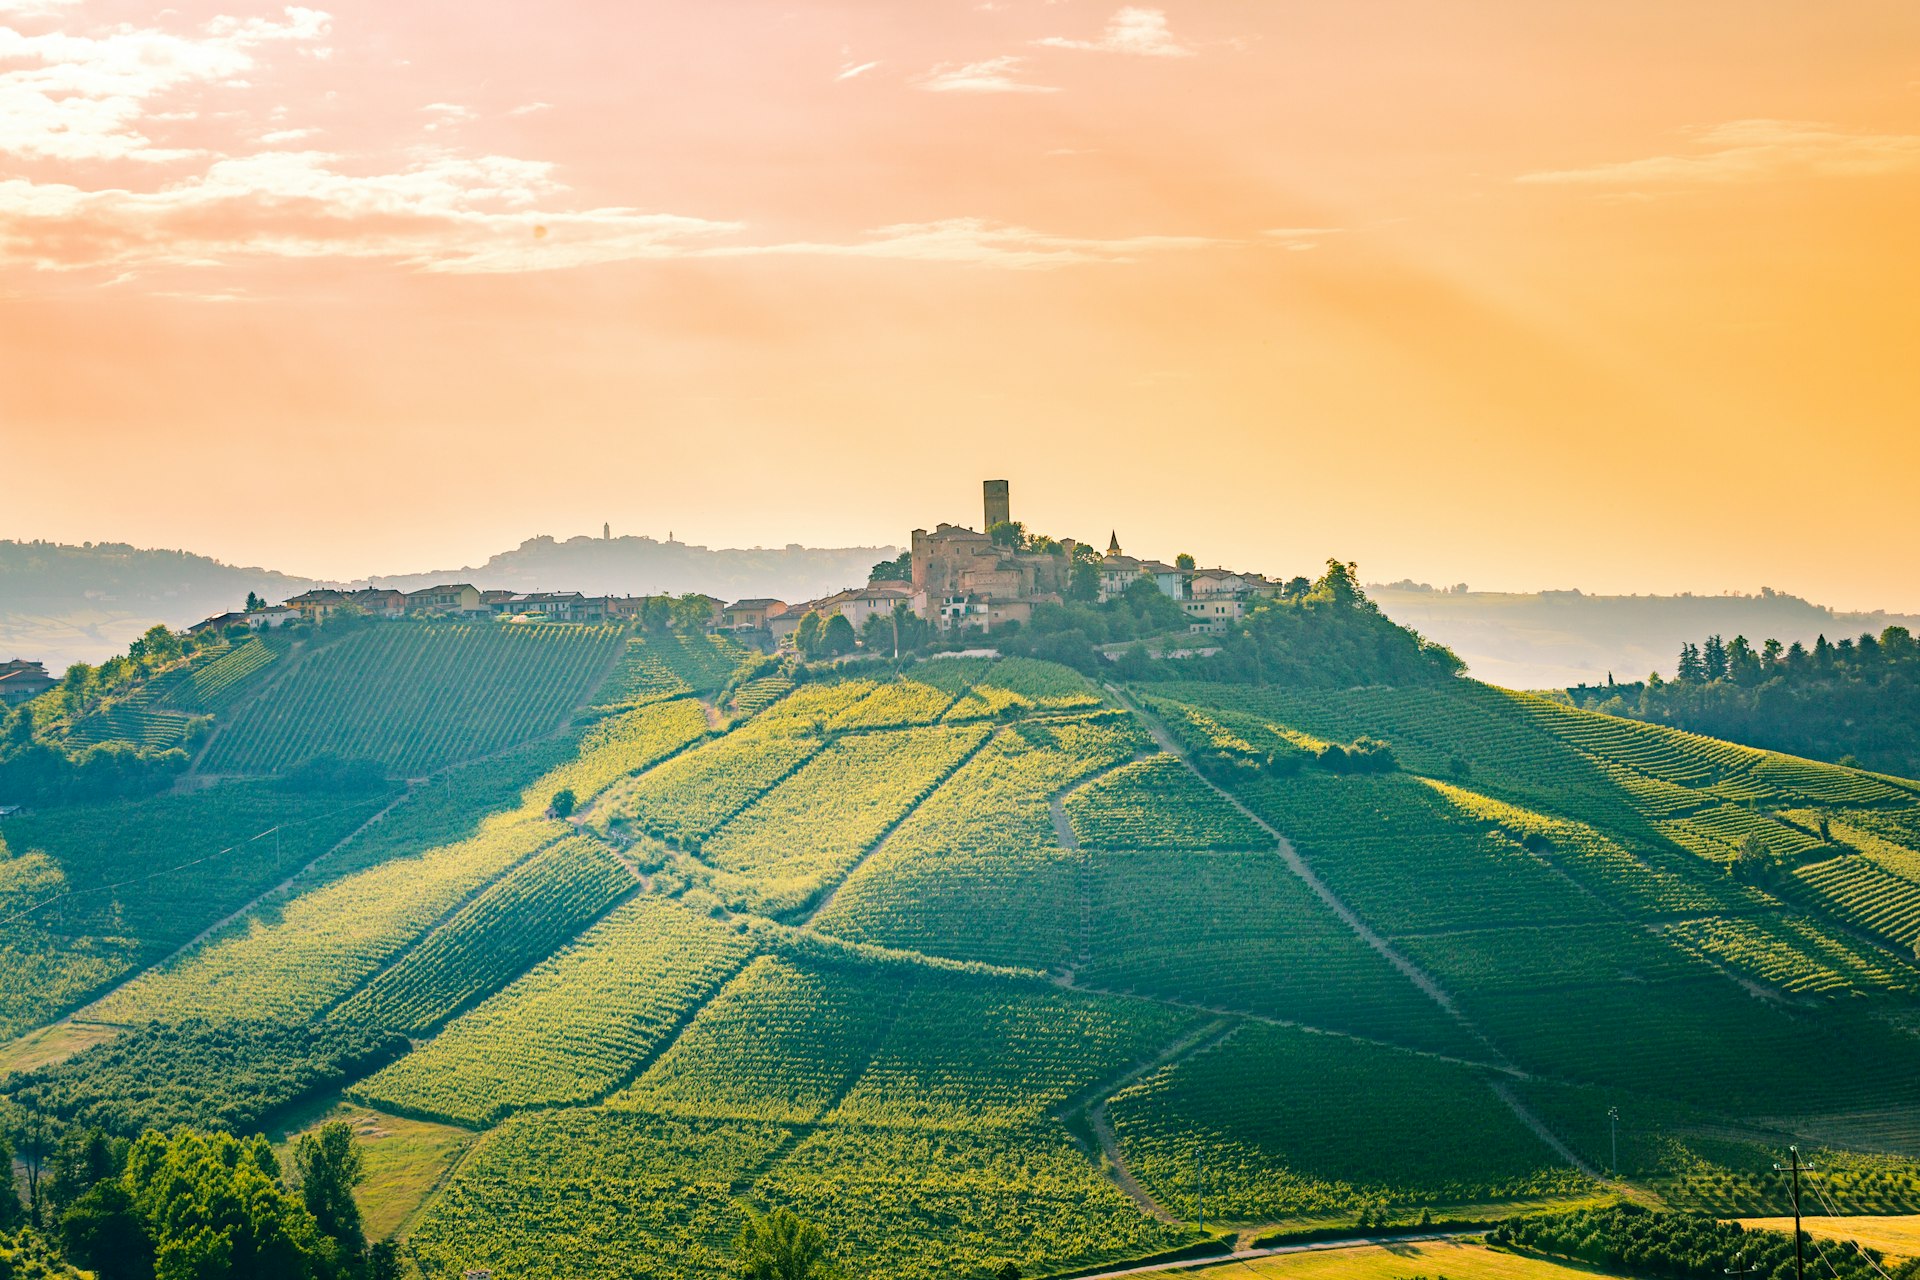 A picture of the vineyards in the Langhe hills